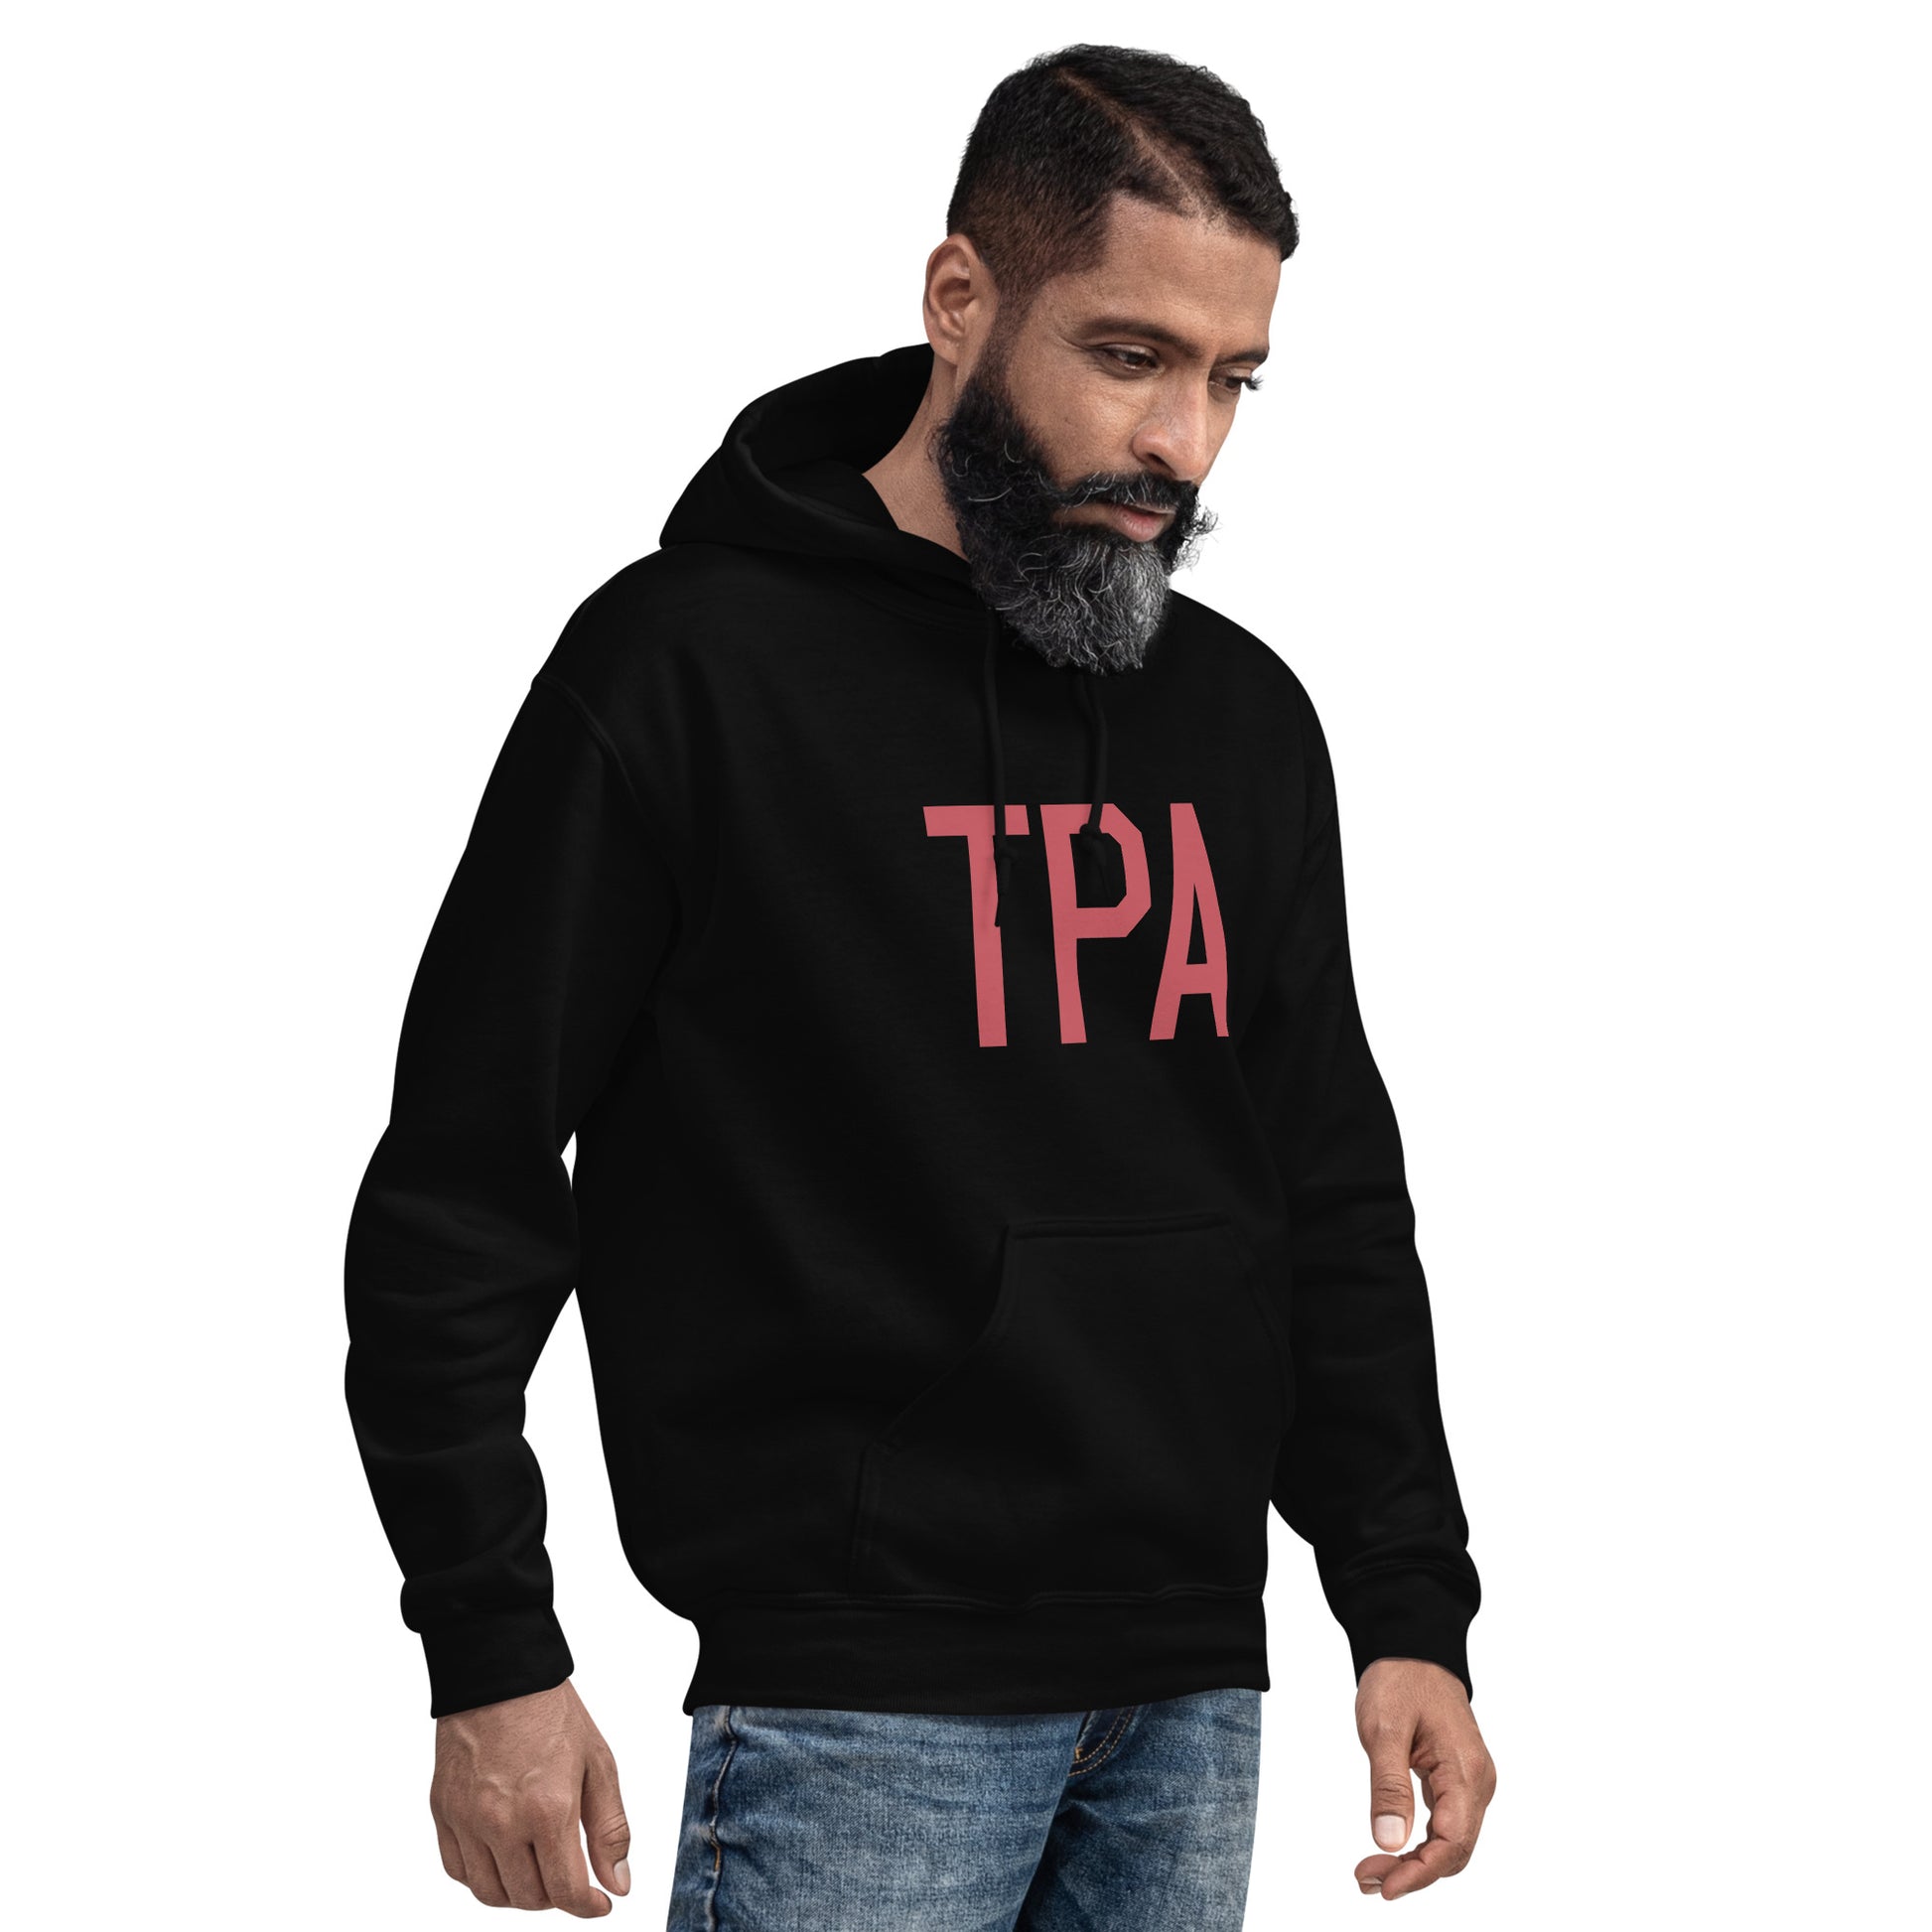 Aviation Enthusiast Hoodie - Deep Pink Graphic • TPA Tampa • YHM Designs - Image 06